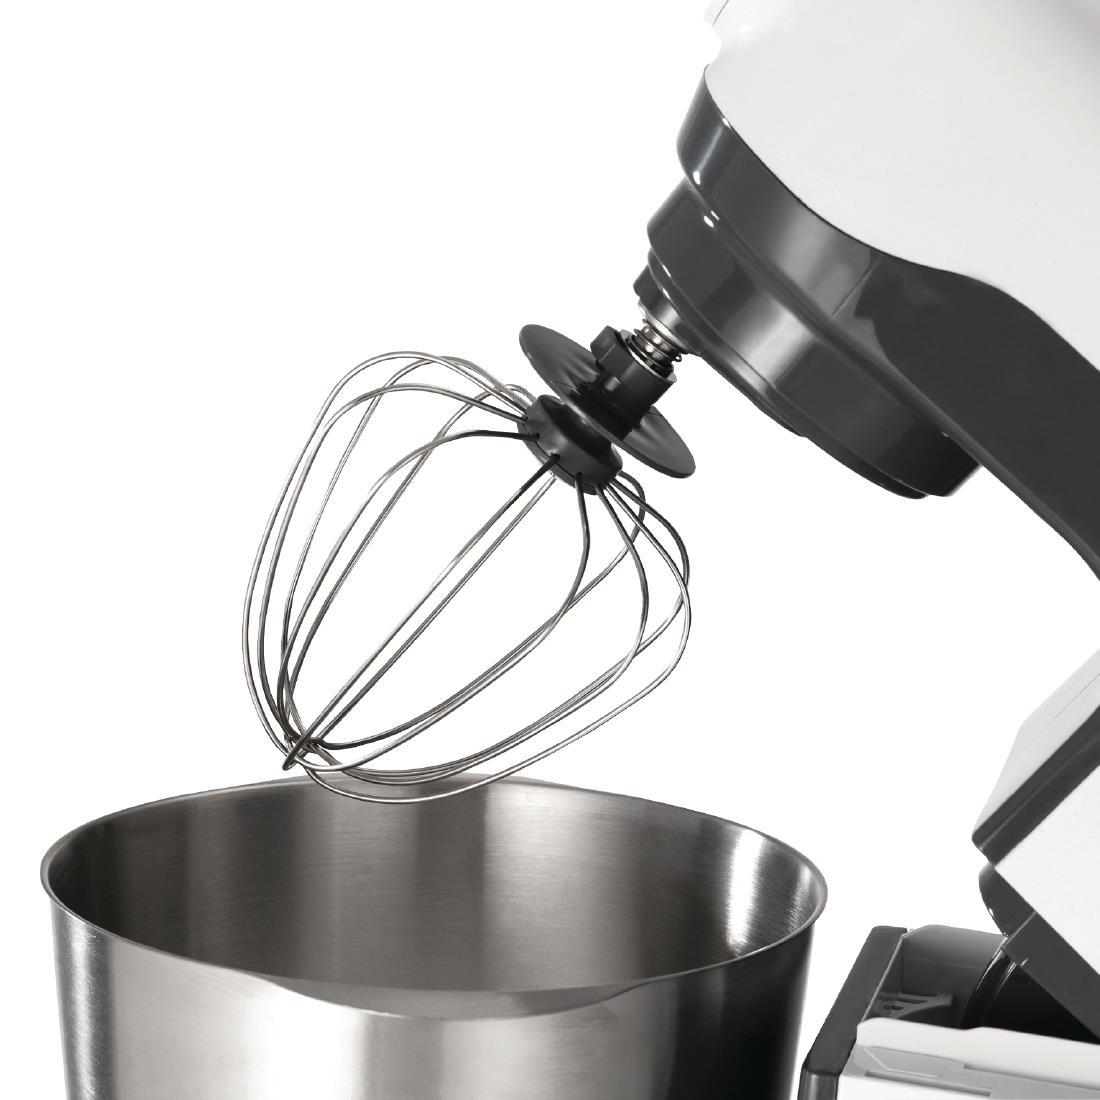 Morphy Richards Stand Mixer 400023 - FP906  - 4